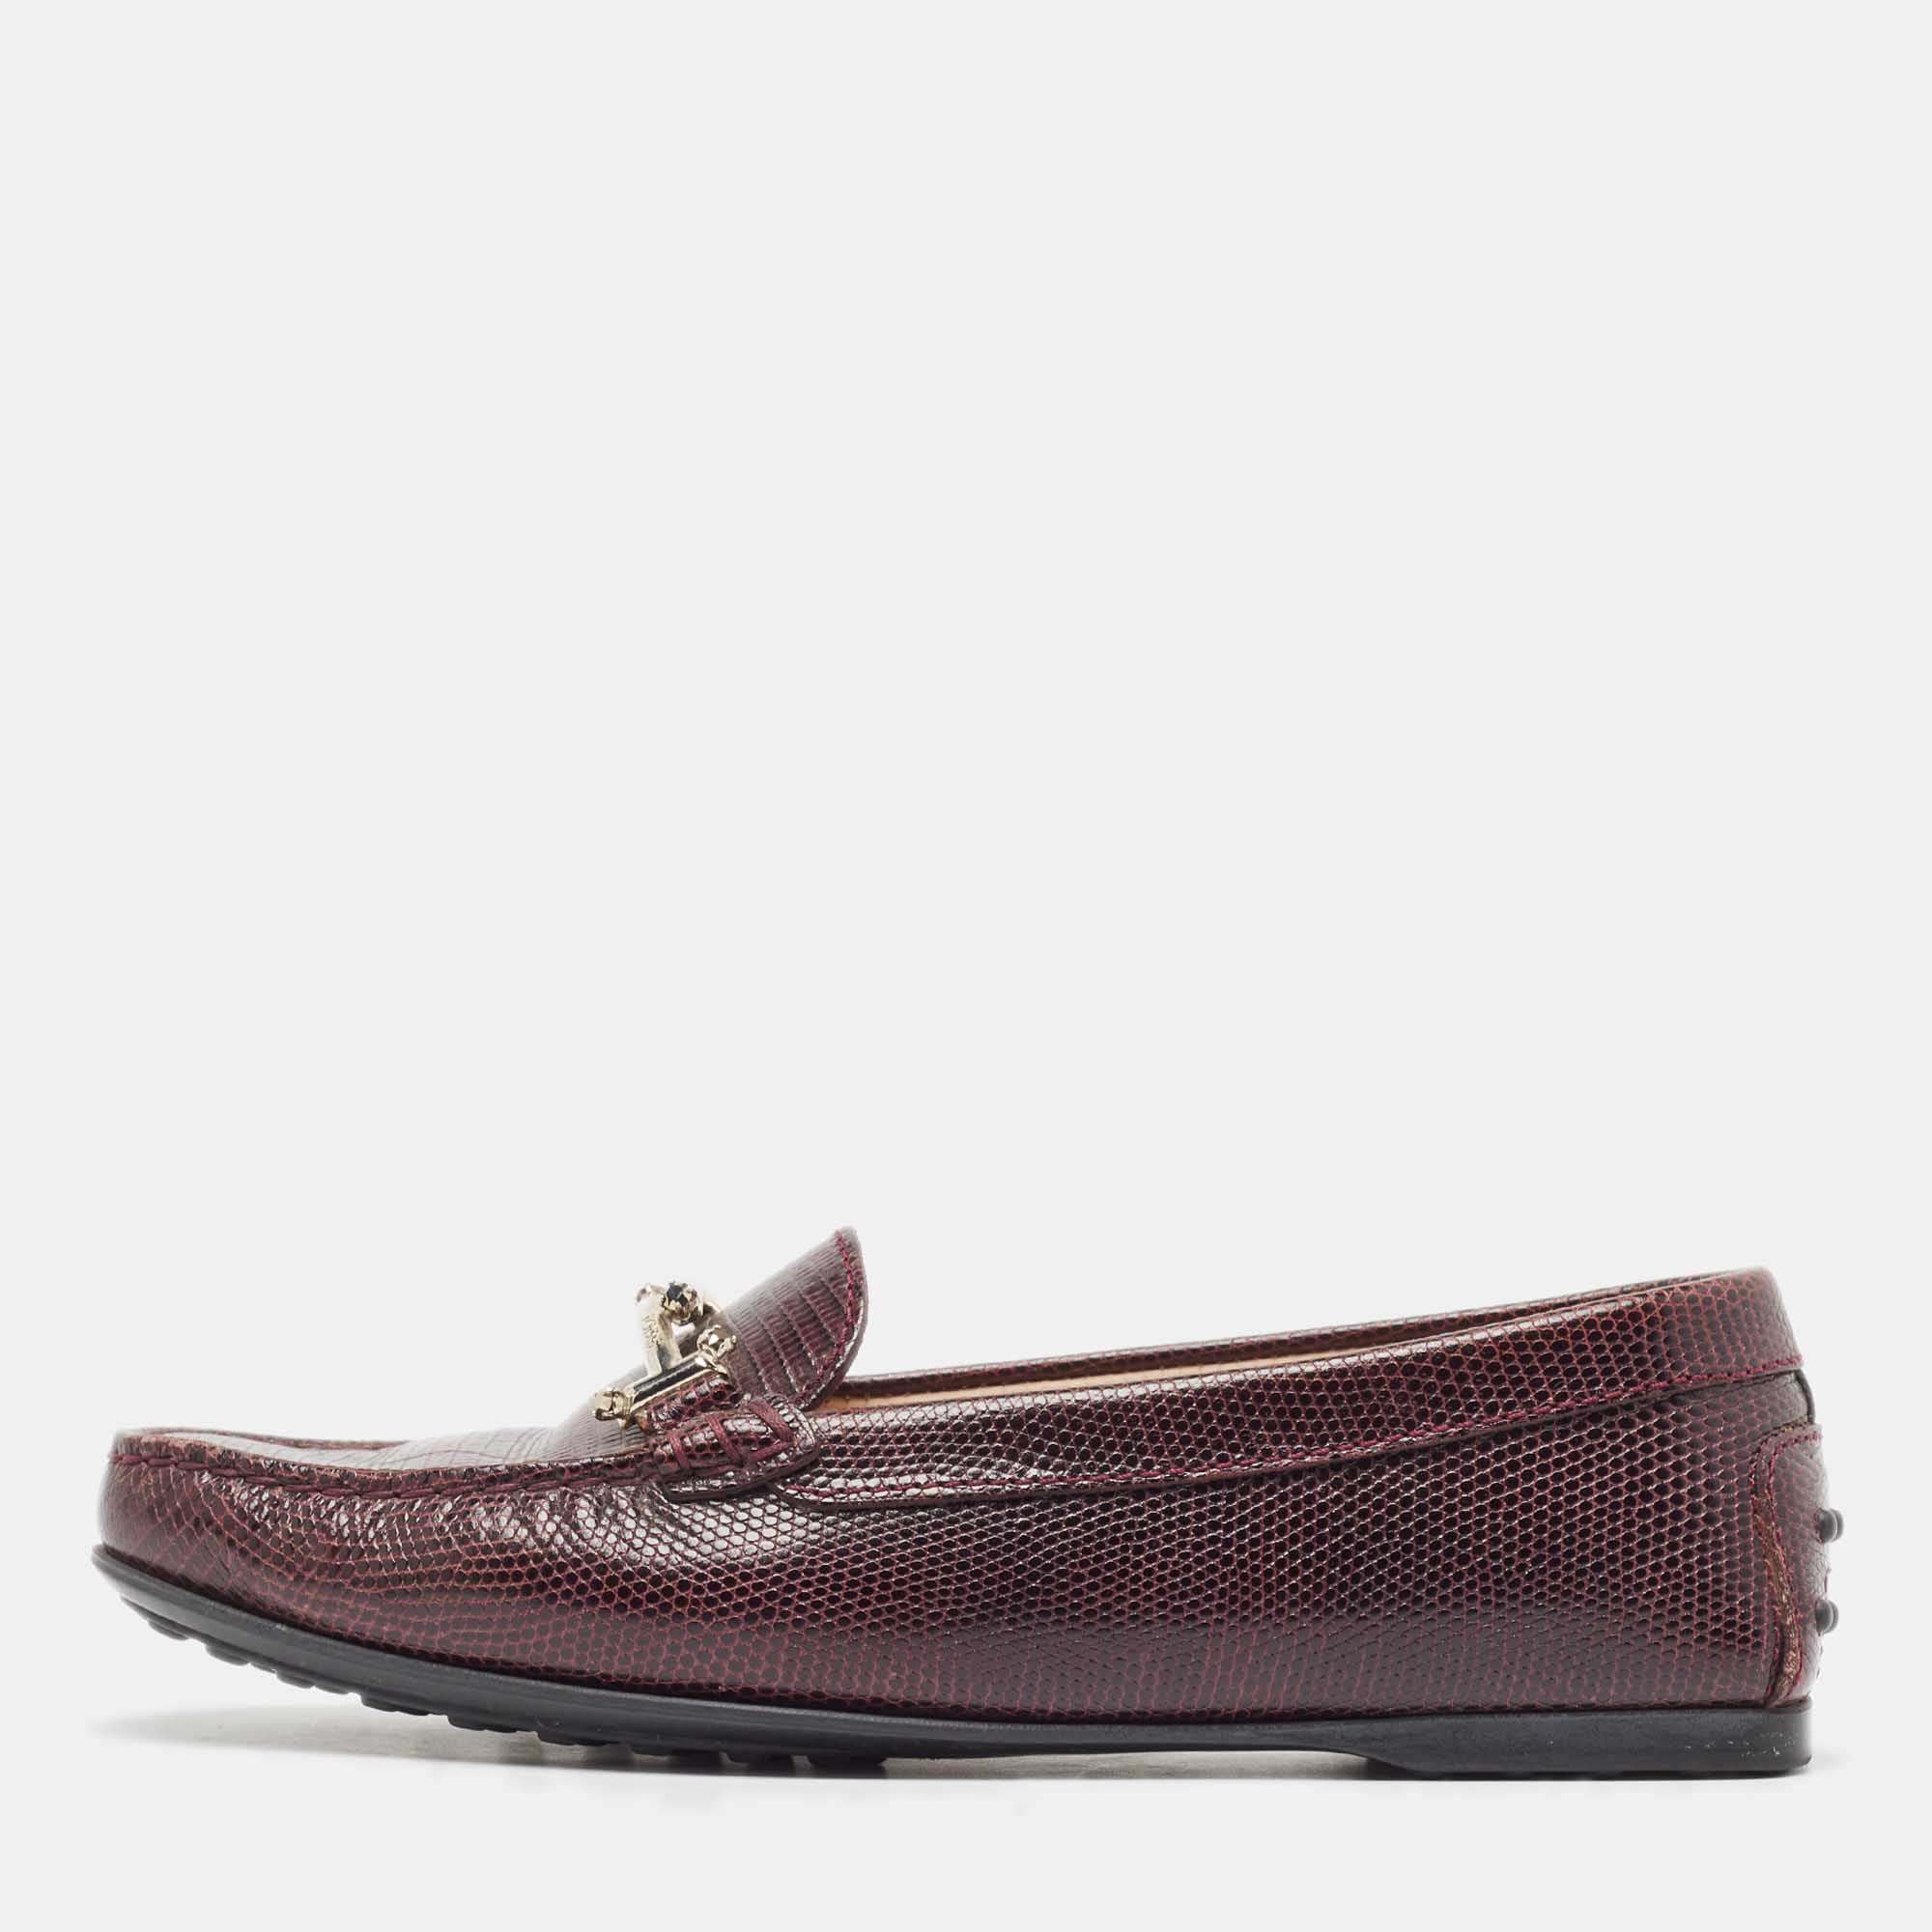 Tod's burgundy embossed lizard double t loafers size 37